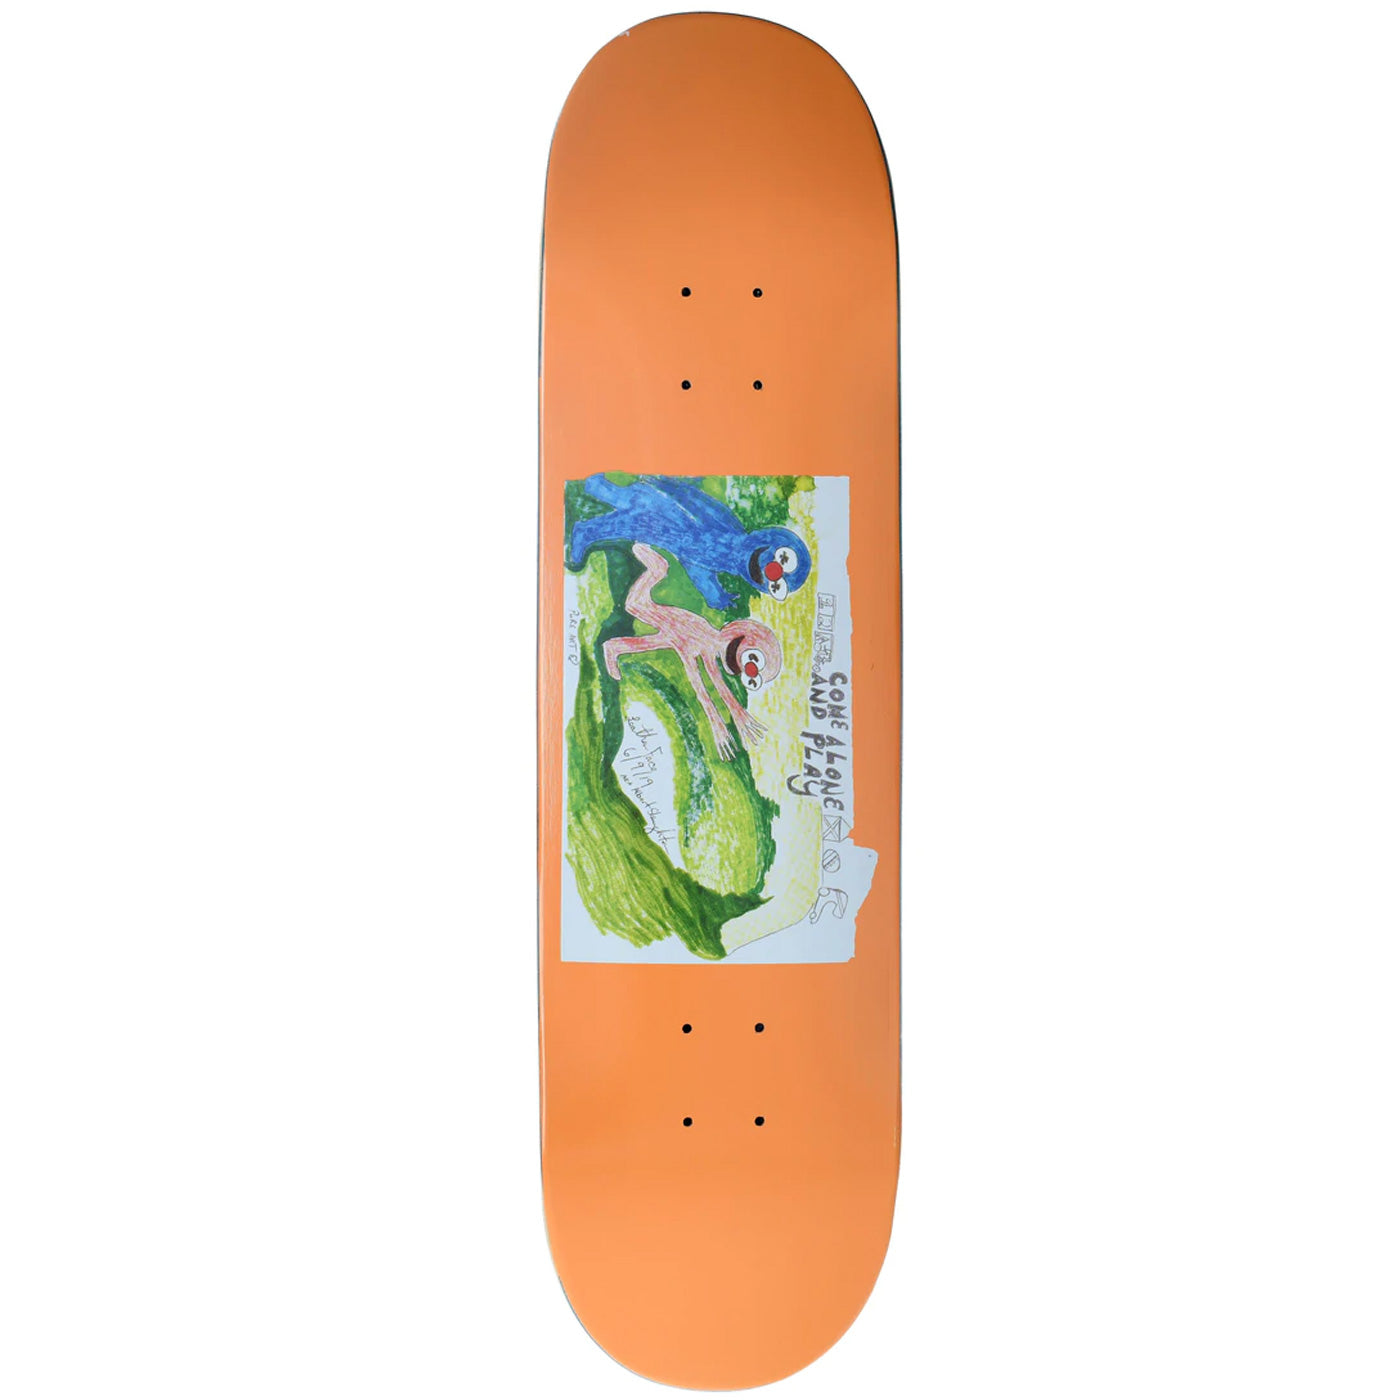 Glue Stephen Ostrowski Come Alone and Play Deck - 8.25"